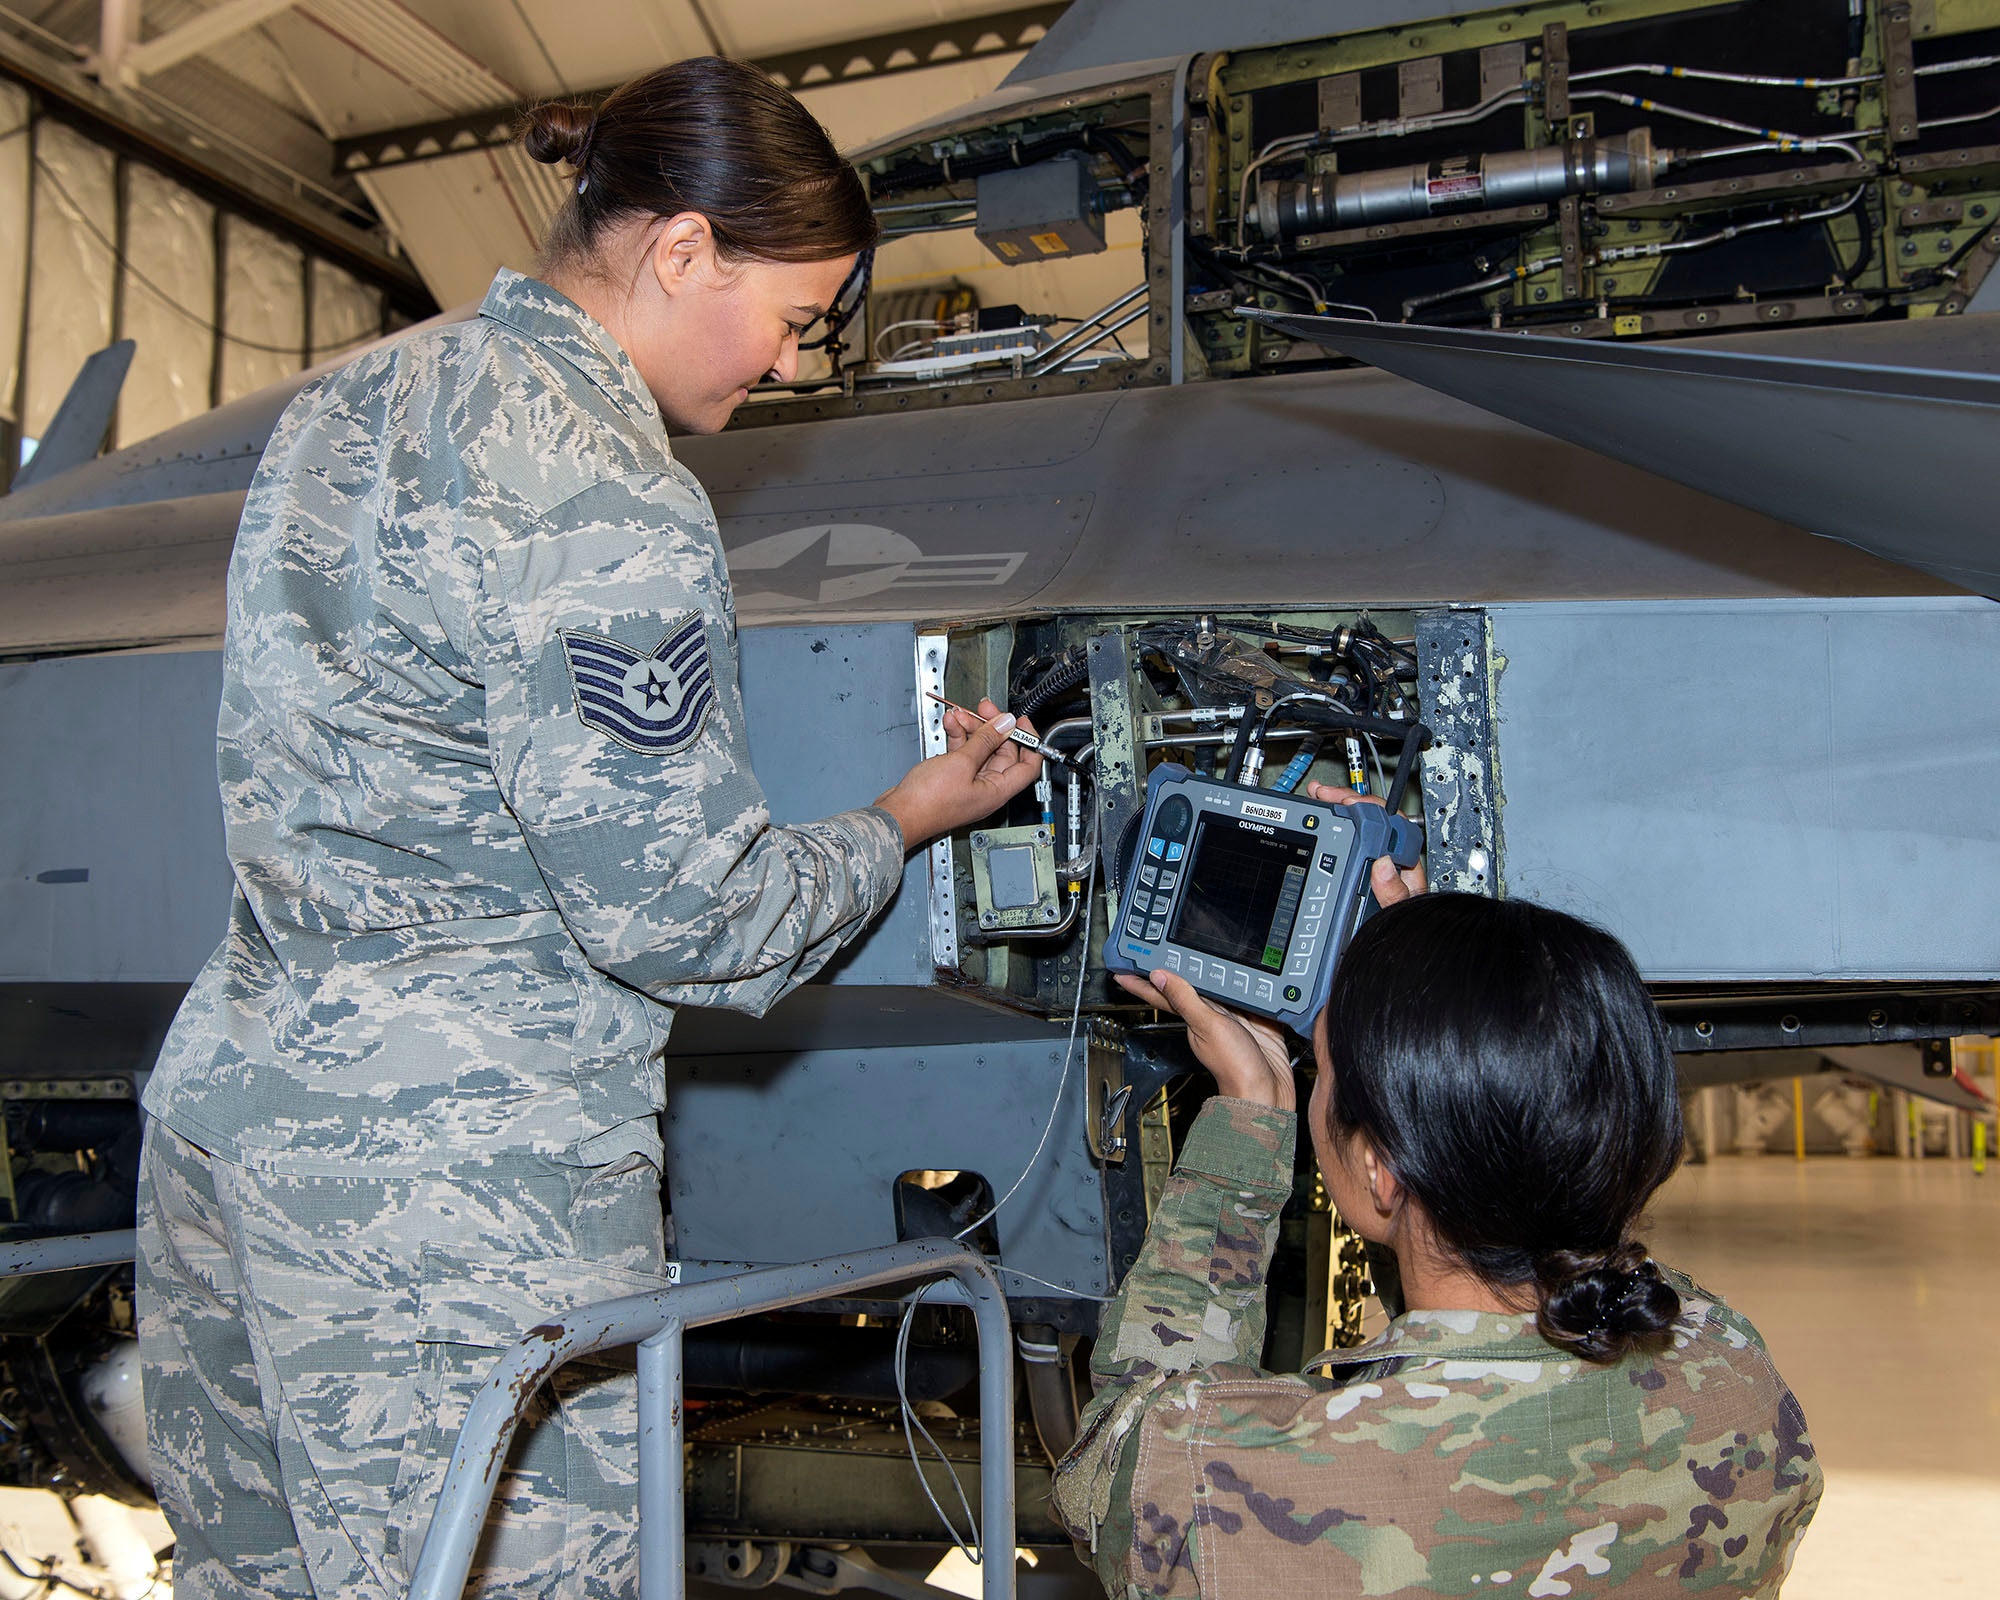 U.S. Air Force Tech. Sgt. Rosa Valdes and Staff Sgt. Rebecca Toland, both non-destructive inspection technicians from the 140th Maintenance Squadron, Colorado Air National Guard, perform an inspection of the 446 bulkhead on a block-30 F-16 Fighting Falcon aircraft. The 446 bulkhead is aft fuselage structure of the F-16 aircraft that supports the tail structure and recent tests have indicated an increased amount of stress cracks in this area. (U.S. Air National Guard photo by Senior Master Sgt. John Rohrer)